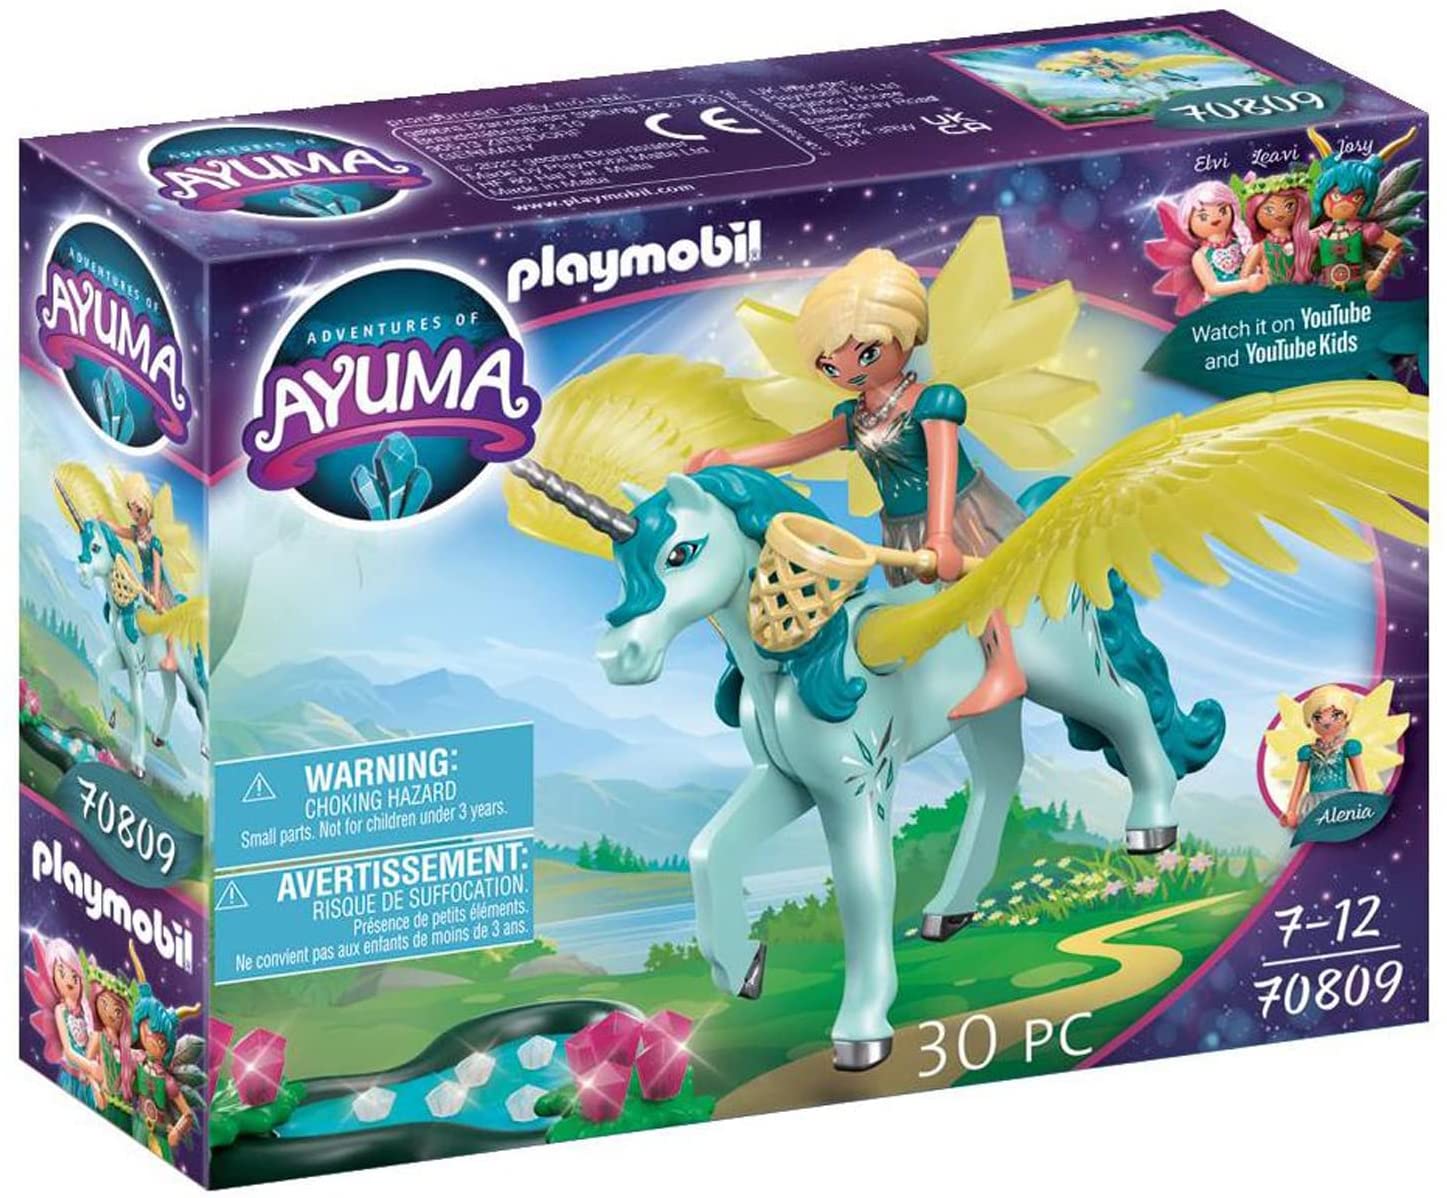 PLAYMOBIL Adventures of Ayuma 70809 Crystal Fairy with Unicorn Toy for Chil